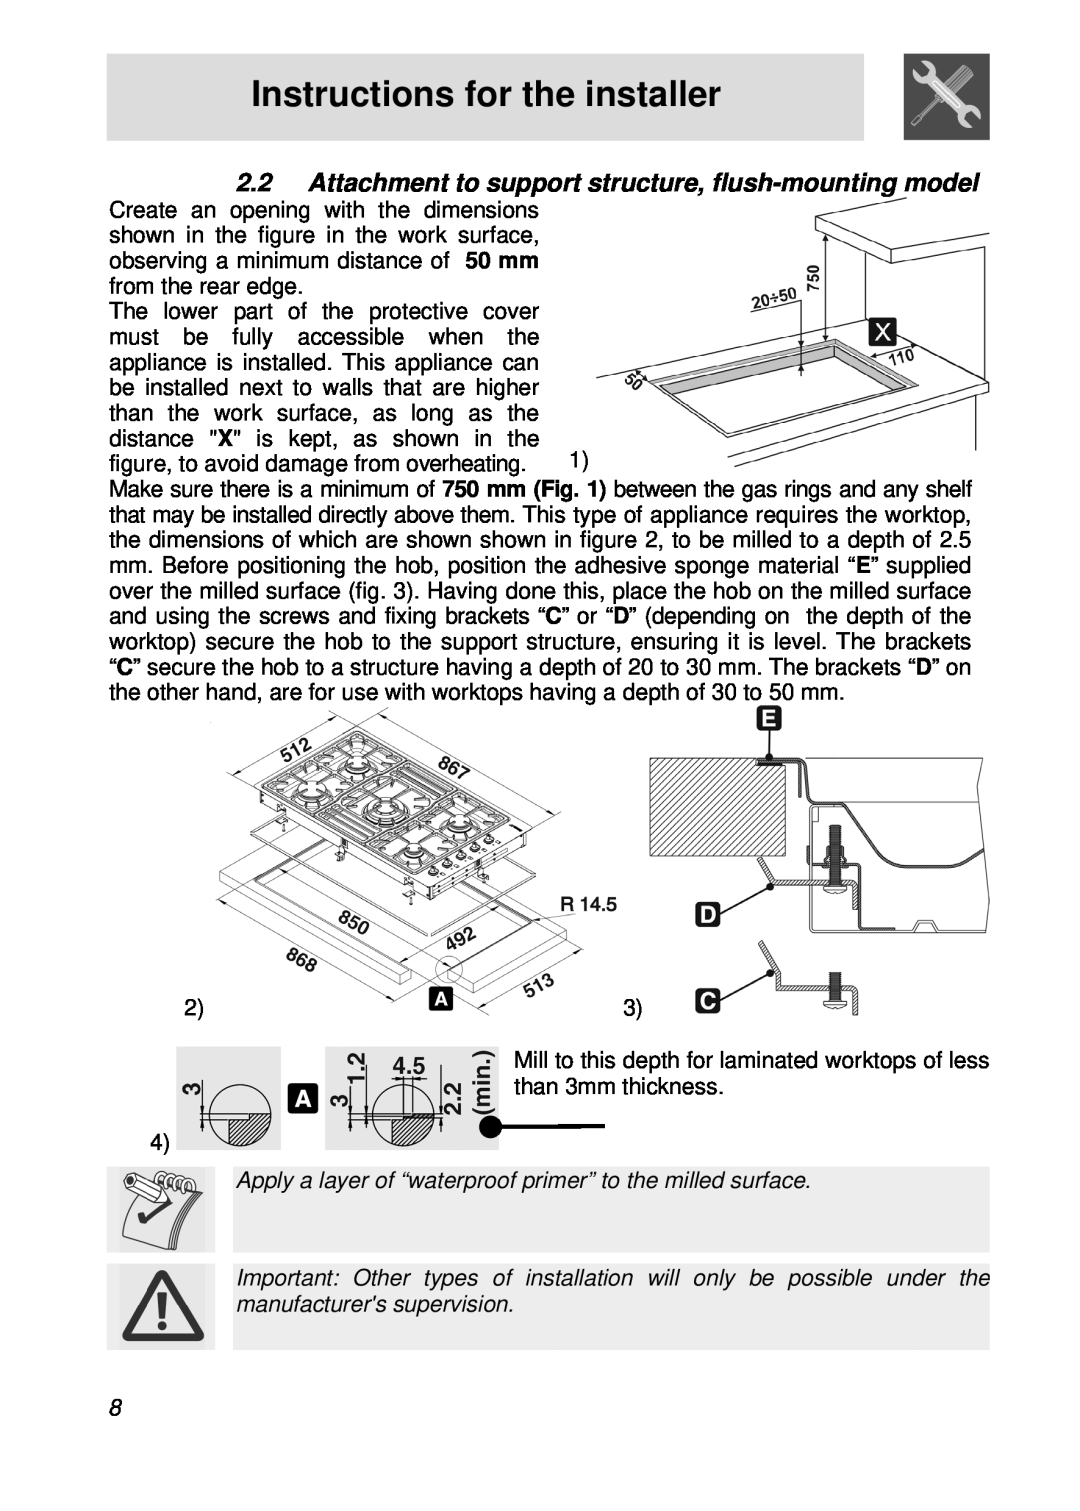 Smeg PGFA95F manual Attachment to support structure, flush-mounting model, Instructions for the installer 